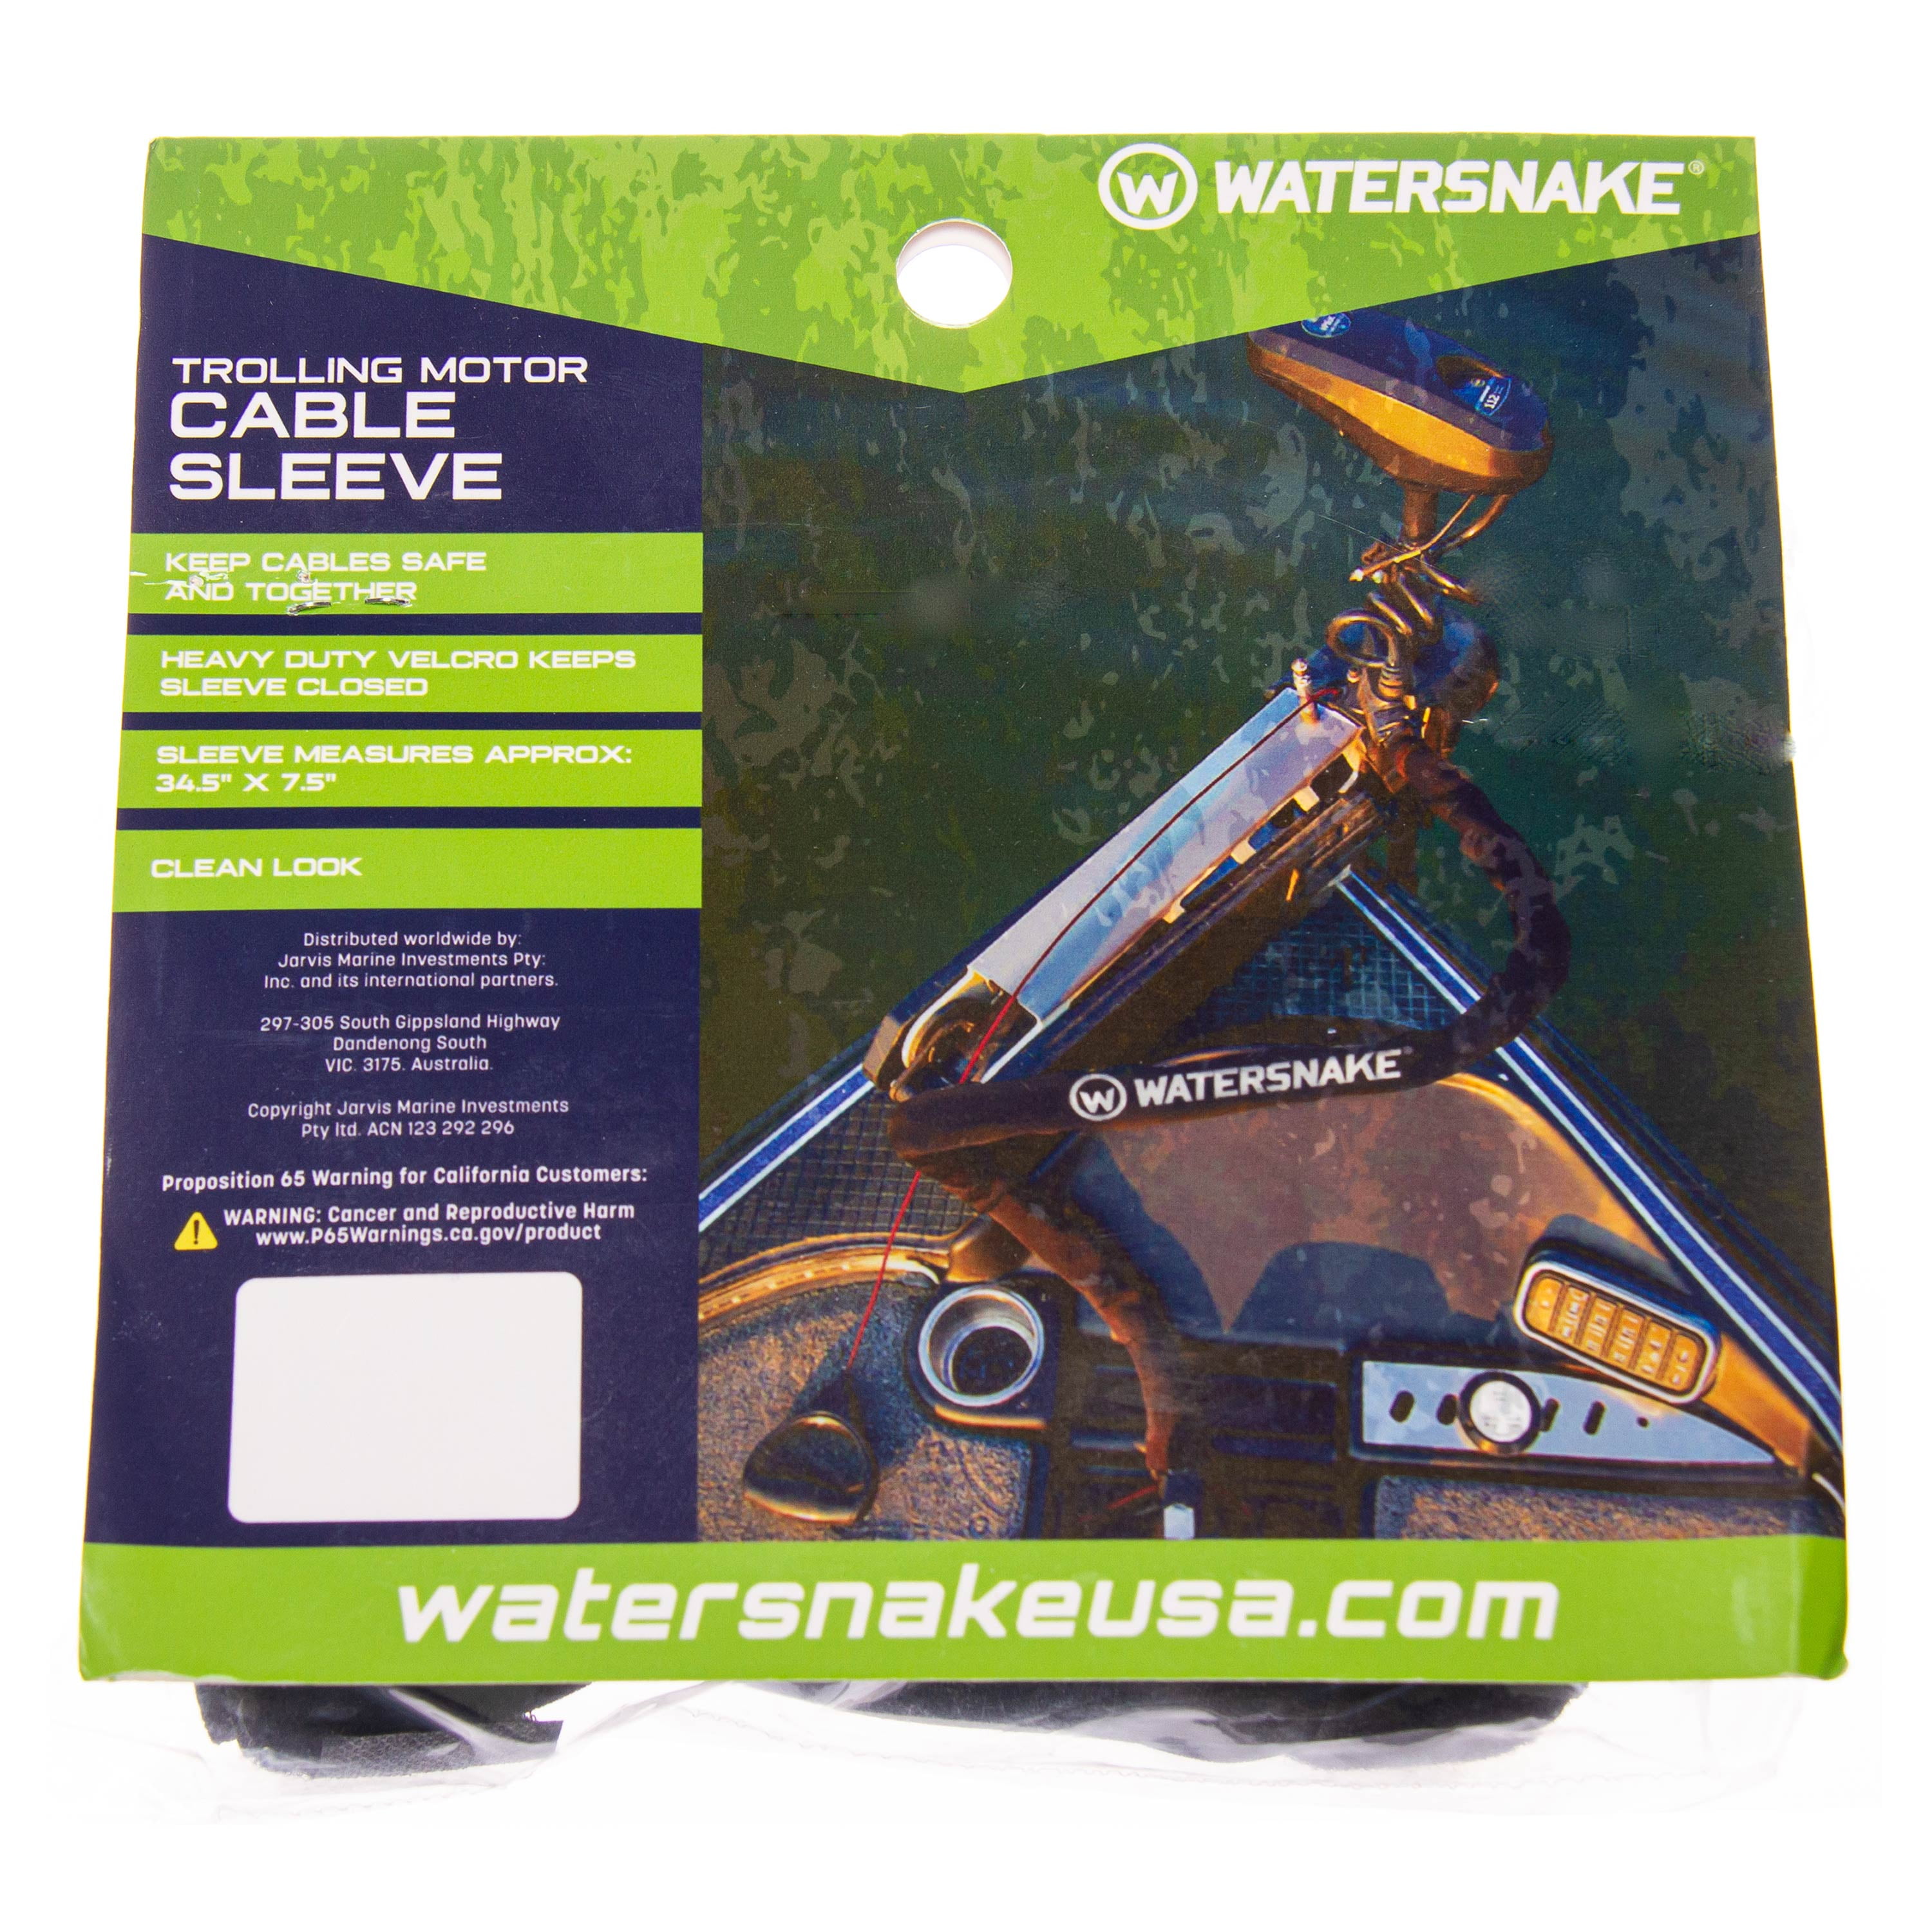 Watersnake Brand Trolling Motor Cable Sleeve. For deck or transom mount trolling  motors. 0 lbs thrust. 